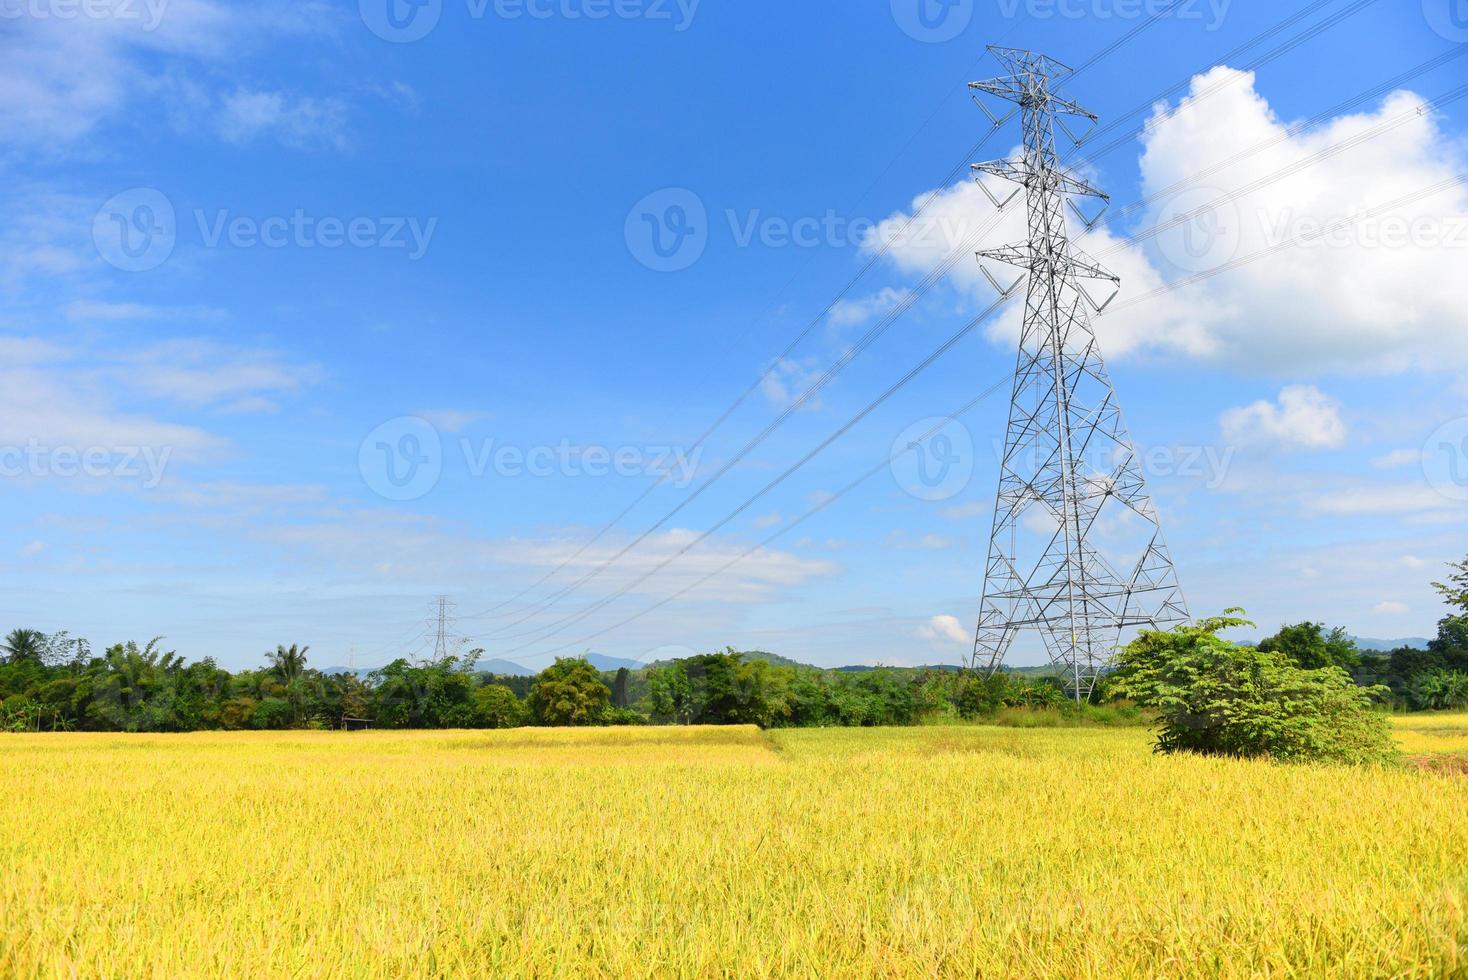 High voltage post, High voltage tower blue sky background, Electricity poles and electric power transmission lines against countryside with yellow rice field photo